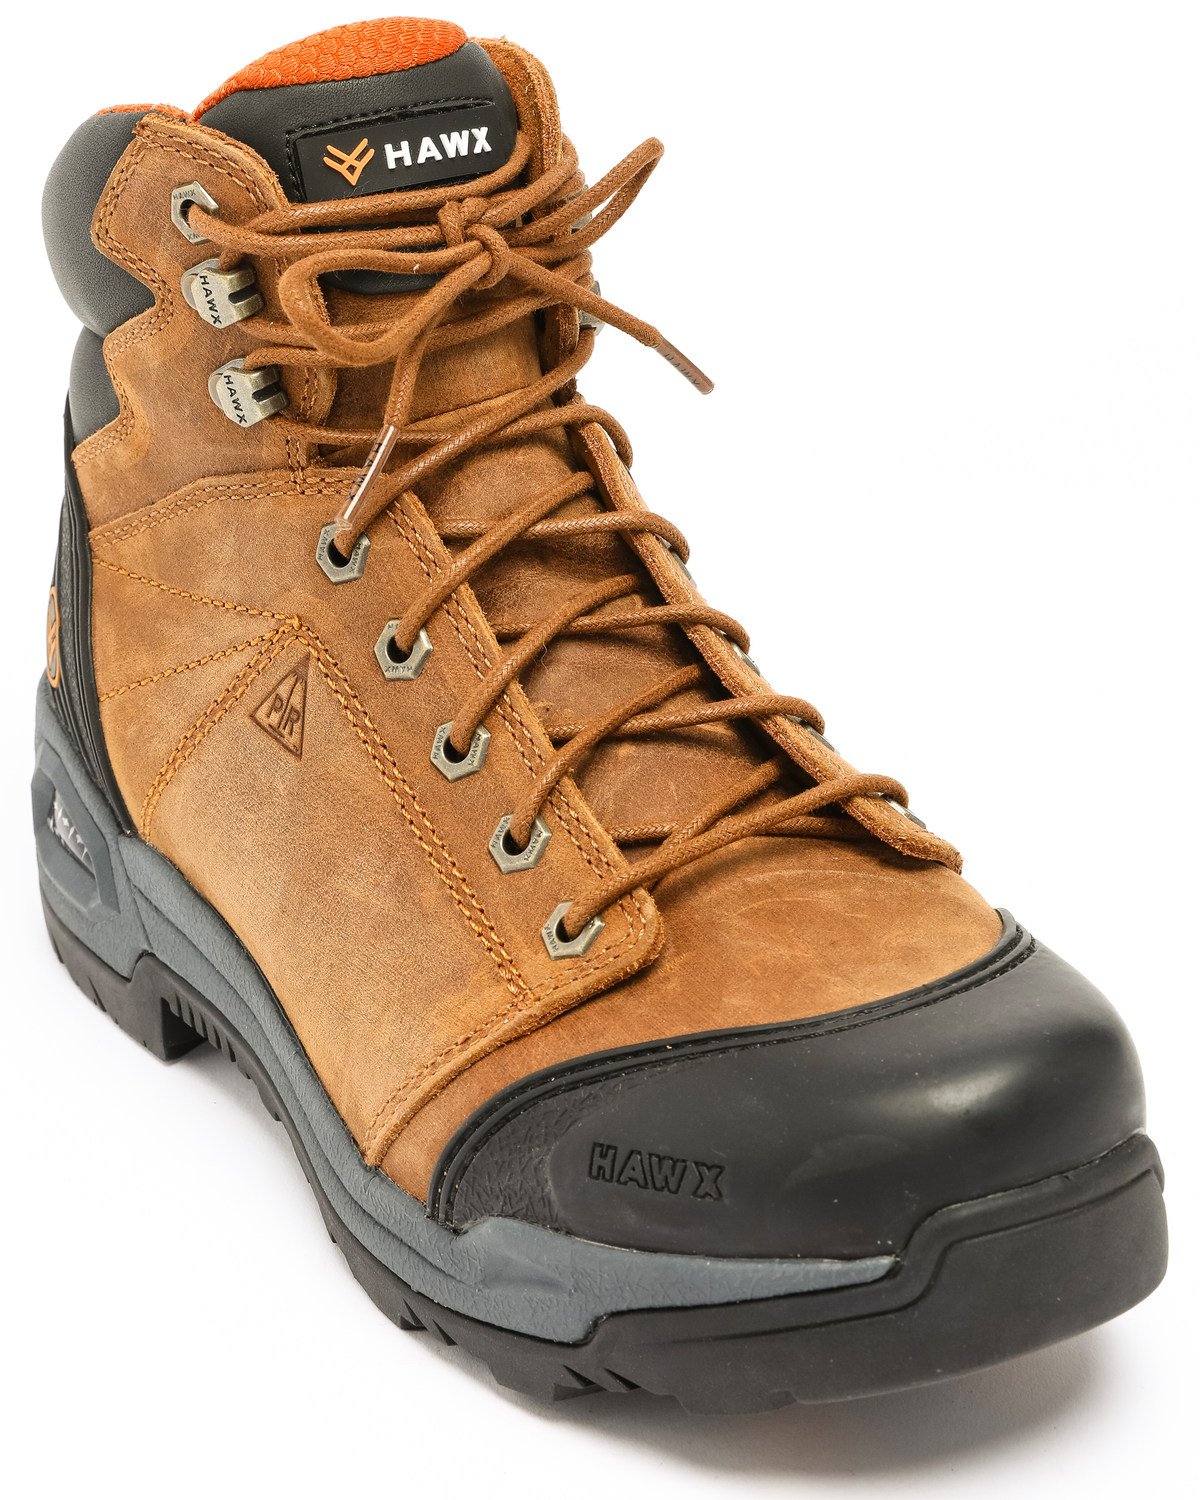 Hawx Men's Lace To Toe Hiker Boots